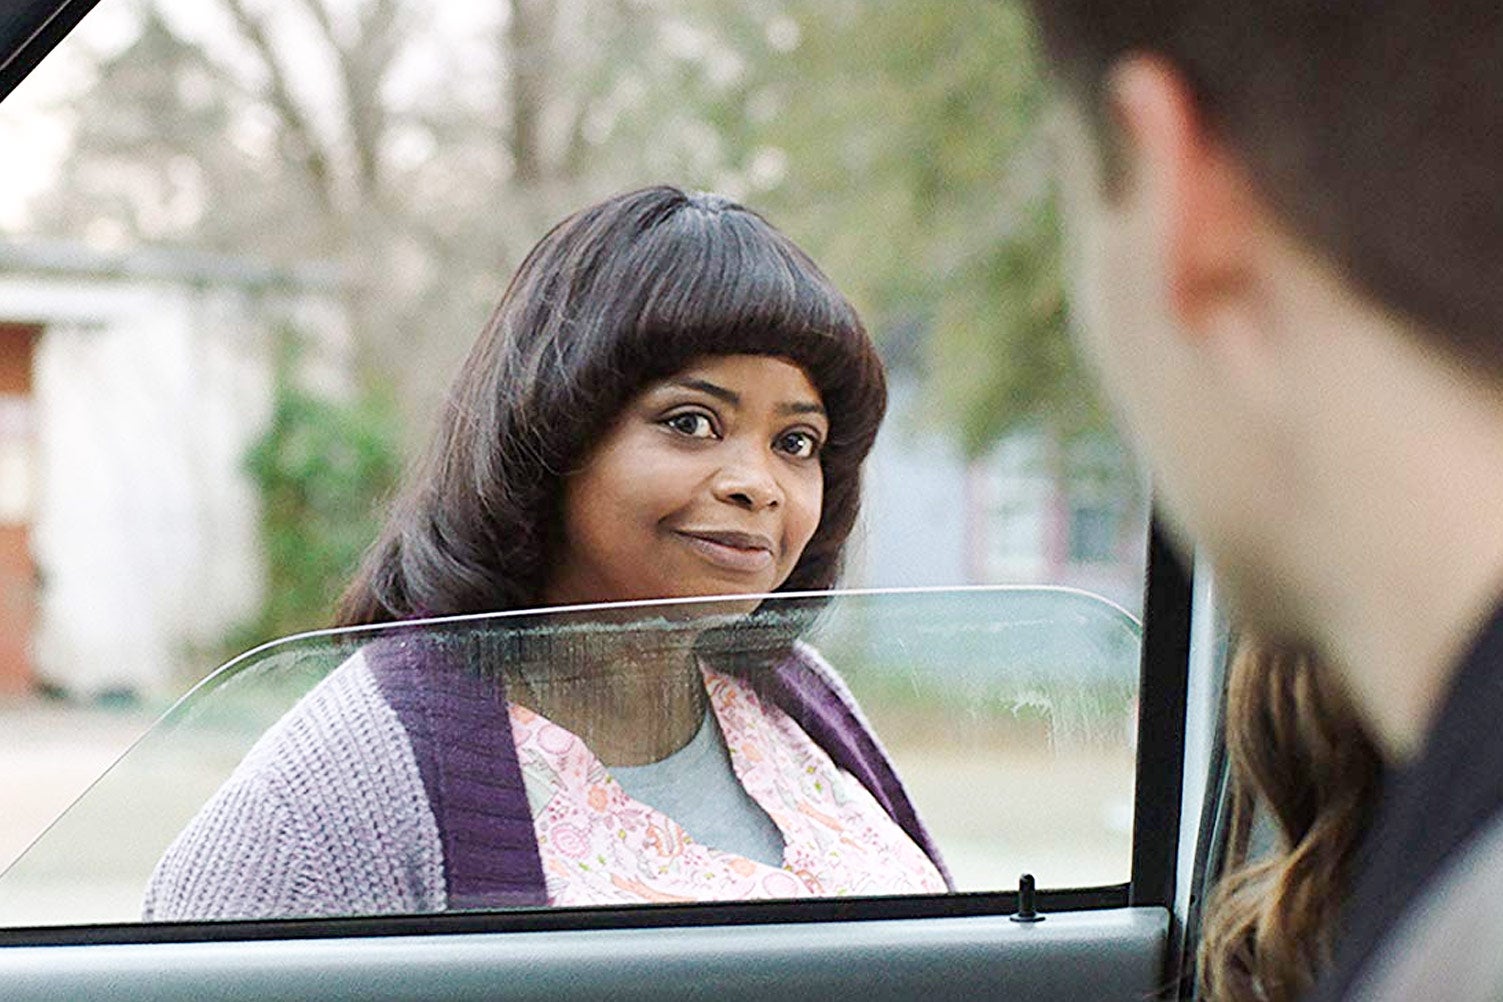 In a scene from Ma, Octavia Spencer looks creepily into a car window.